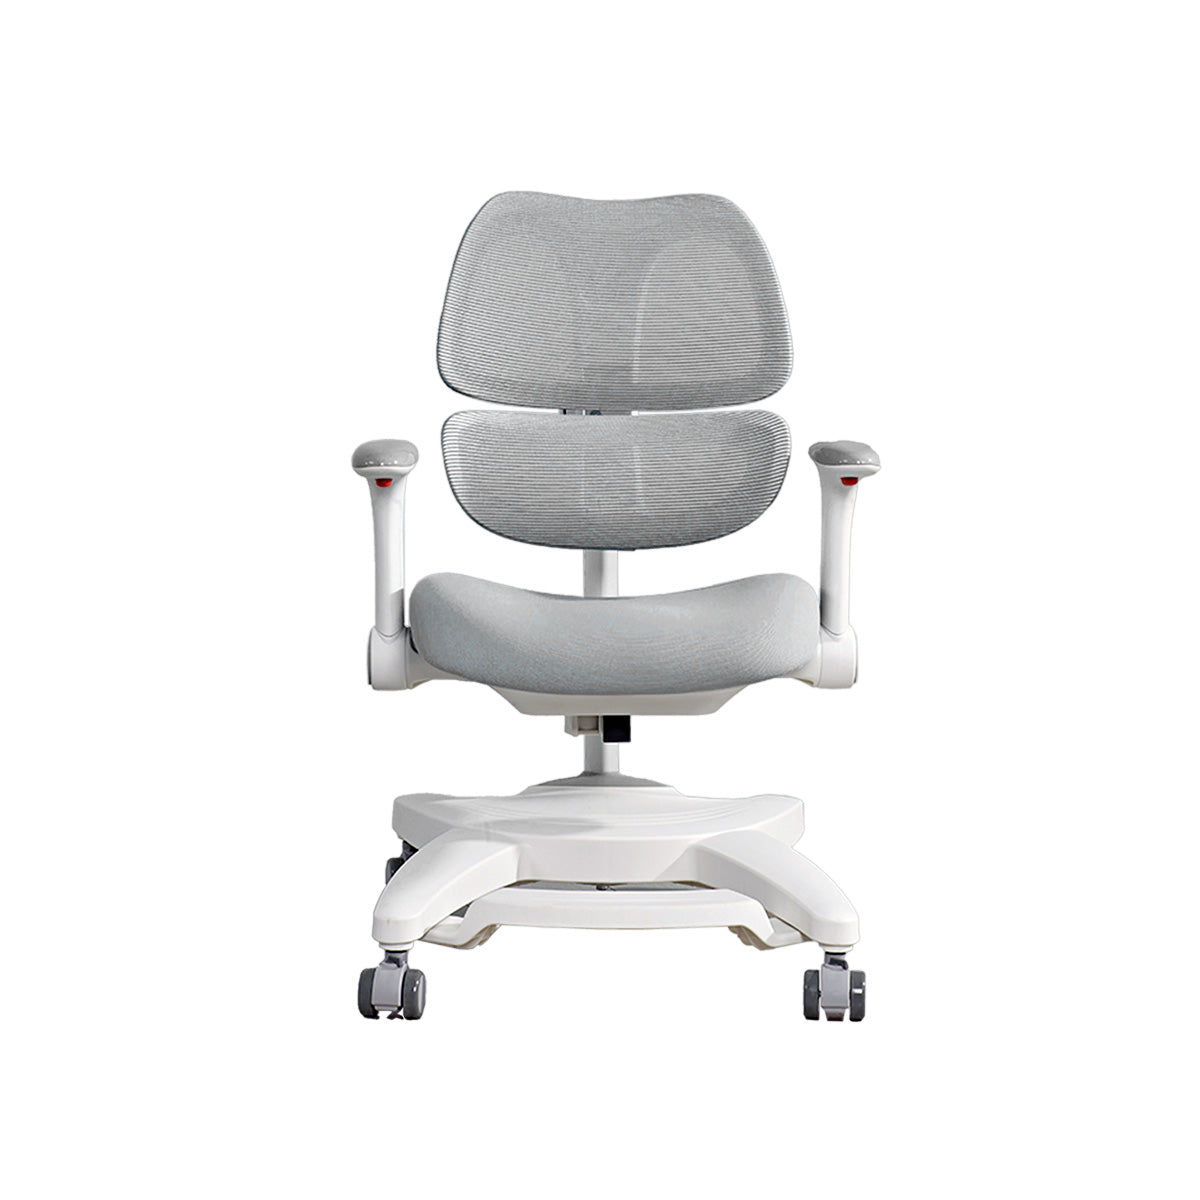 IMPACT Kids Ergonomic Chair With Arm Rest, Grey (Preorder)